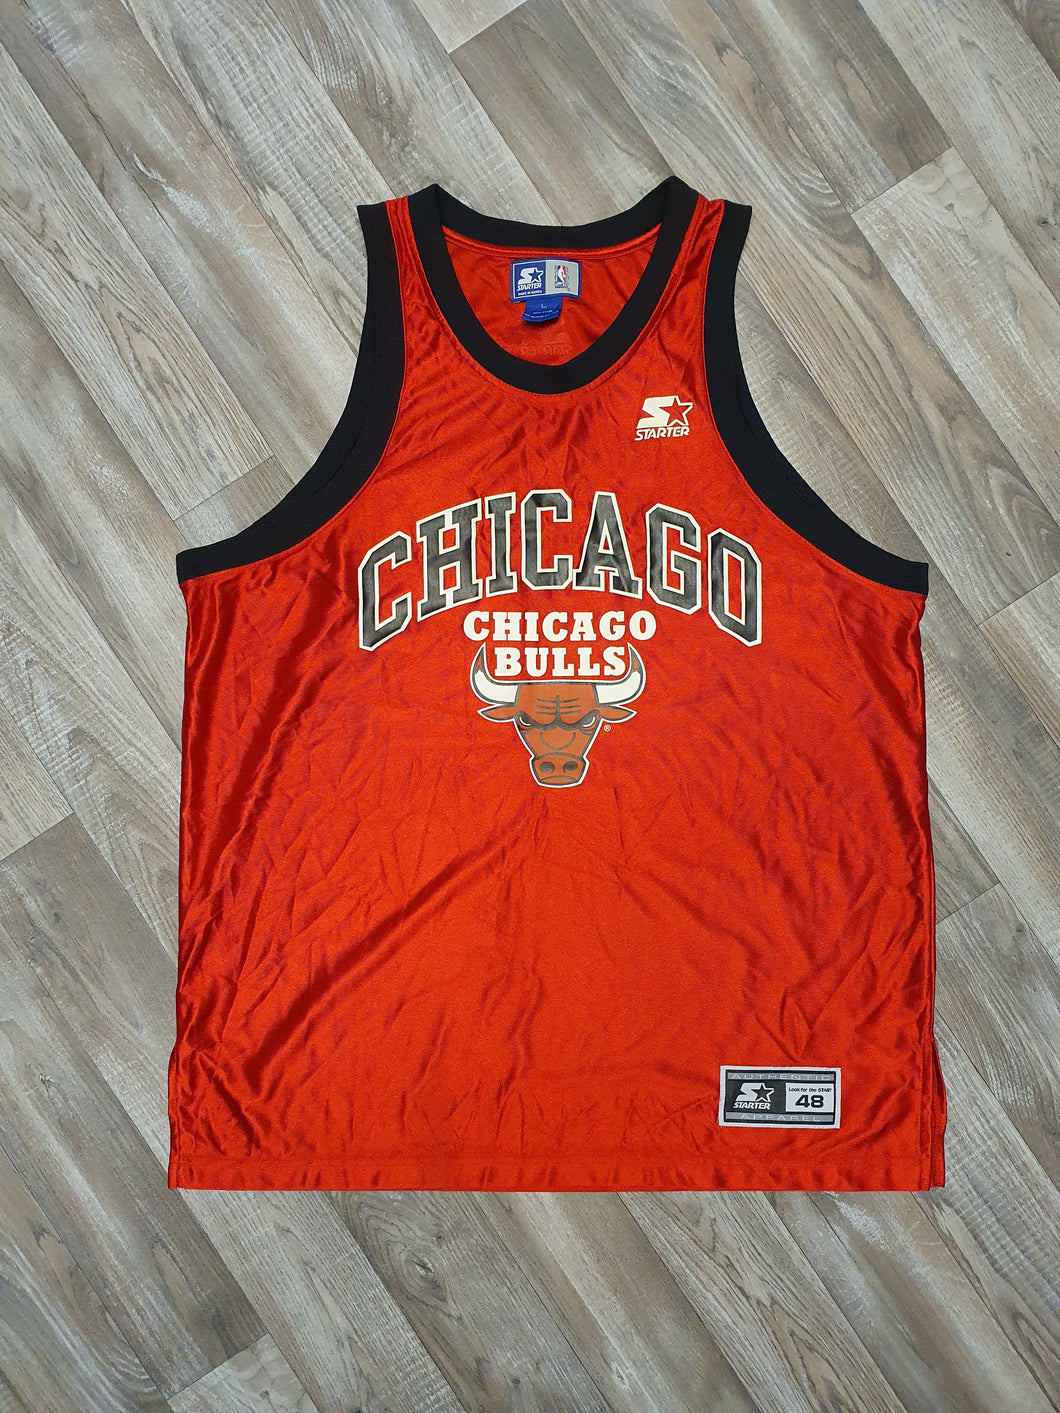 Chicago Bulls Jersey Size Large